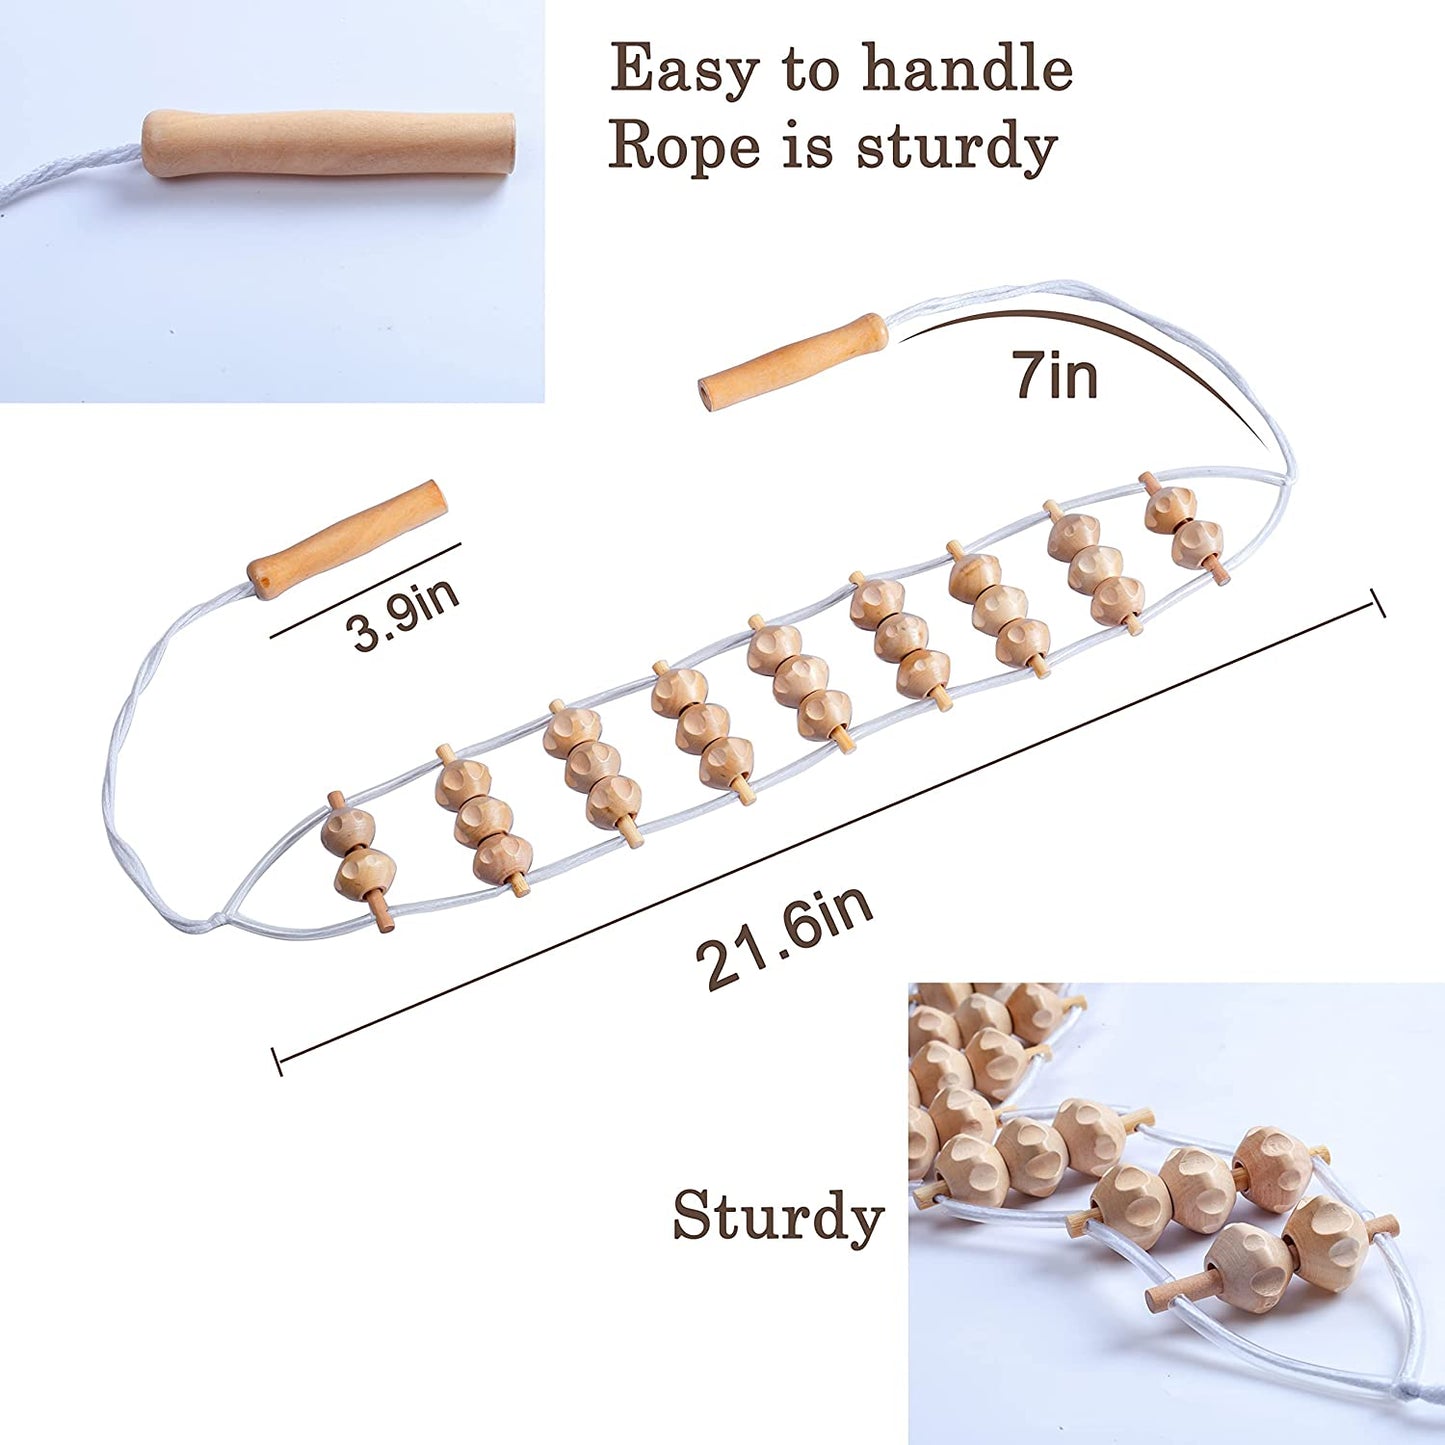 Wood Back Massage Roller Rope Tool,Lymphatic Drainage,Wood Therapy Massage Tools,Maderoterapia Colombiana,Portable Handheld Rolling, Massage Strap for Back, Neck, Shoulders, Legs